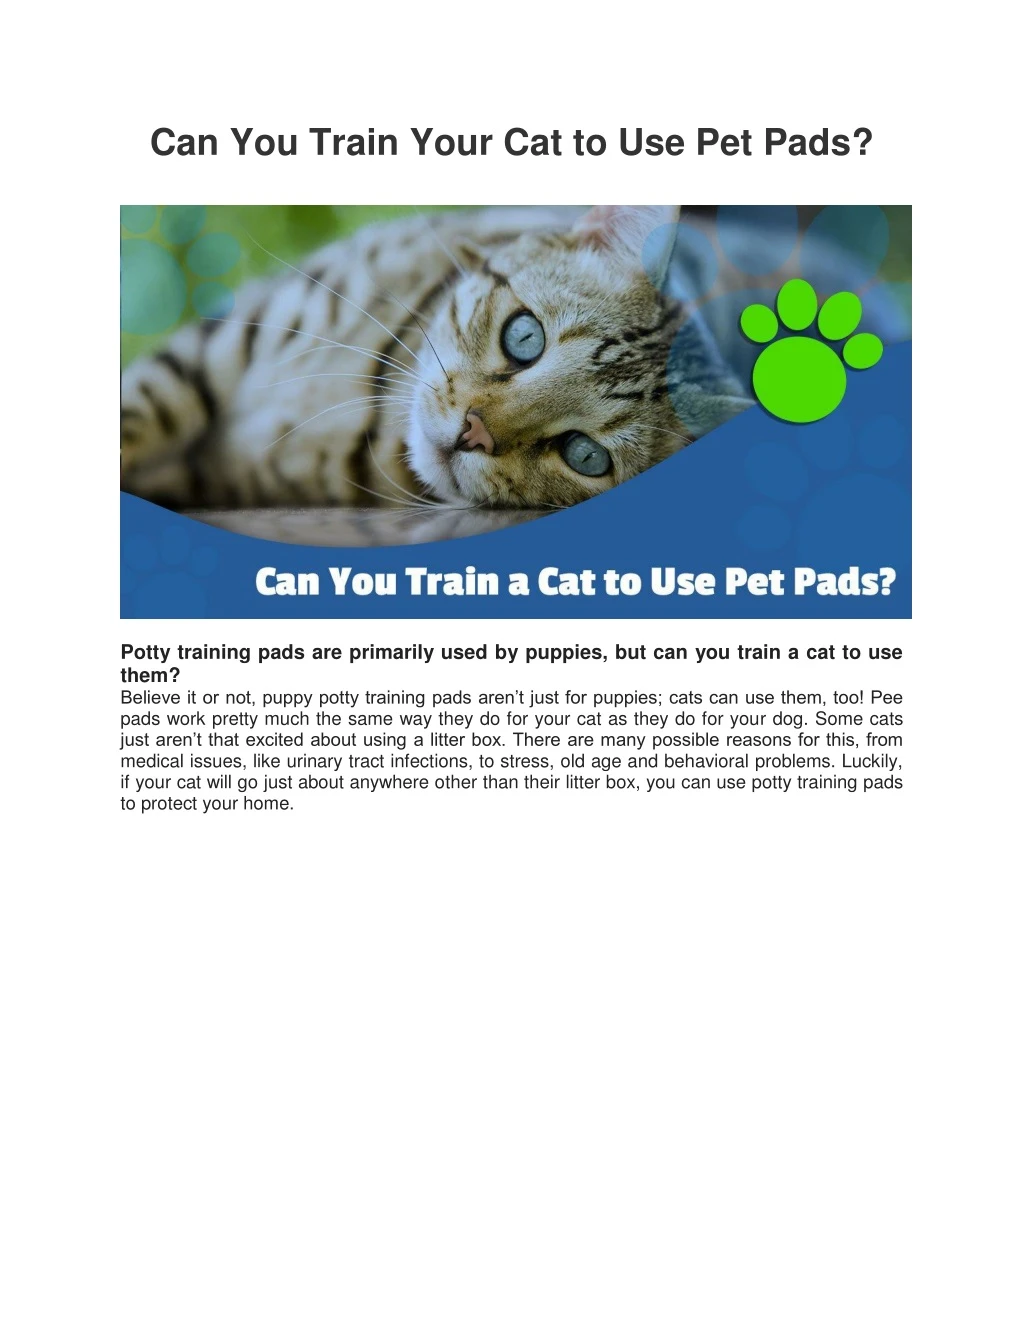 can you train your cat to use pet pads